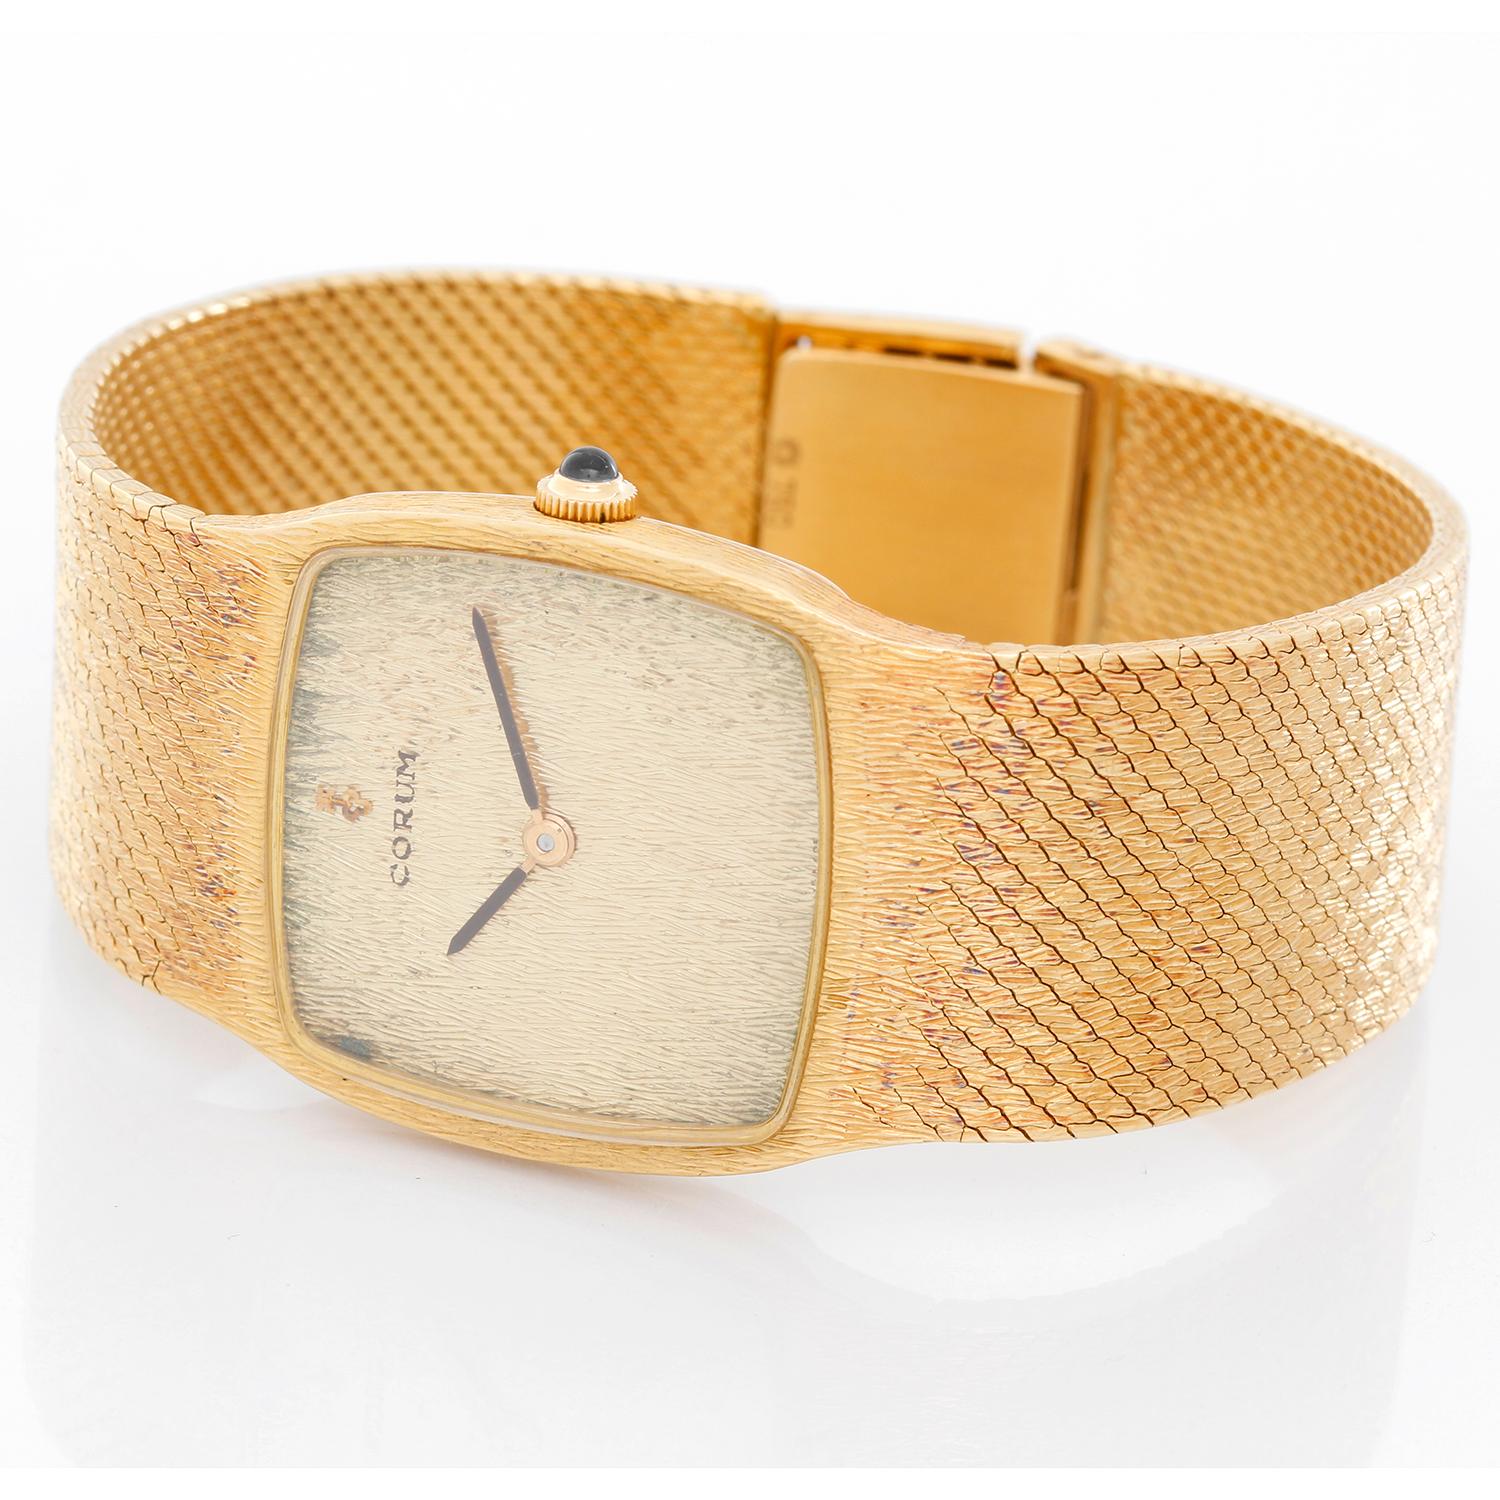 Corum Classique 18K Yellow Gold Watch - Manual. 18K yellow Gold ( 28 x 28 mm ). Textured champagne dial. 18K yellow gold mesh bracelet; will fit a 6.50 inch wrist. Pre-owned with custom box .